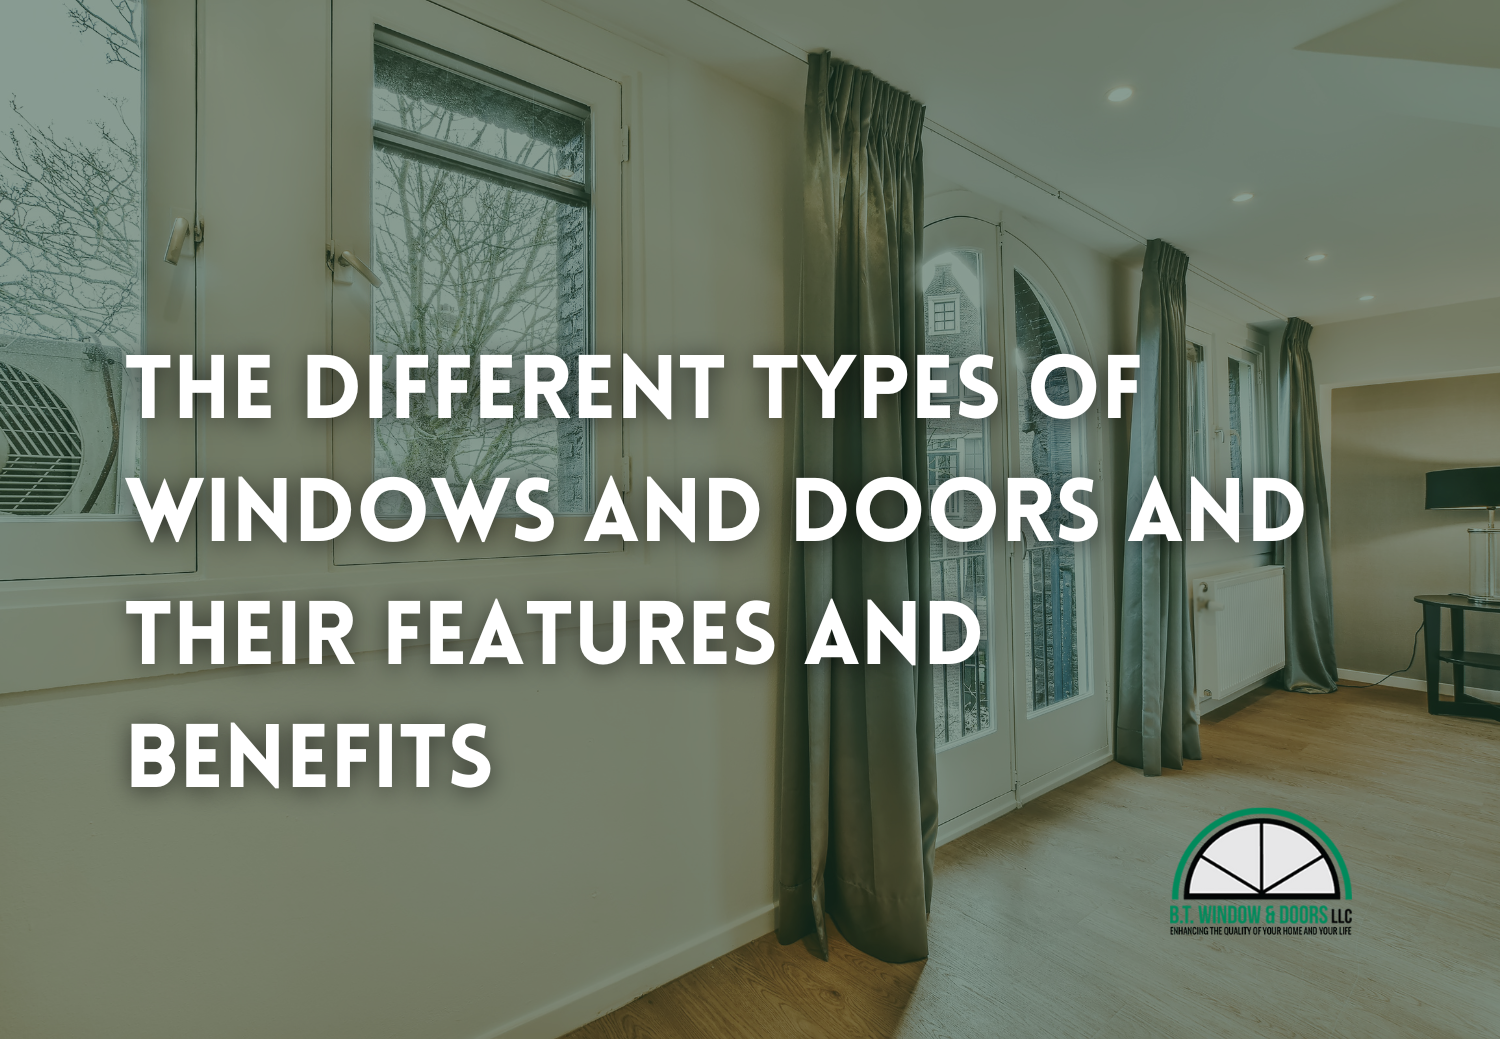 The Different Types Of Windows And Doors And Their Features And Benefits